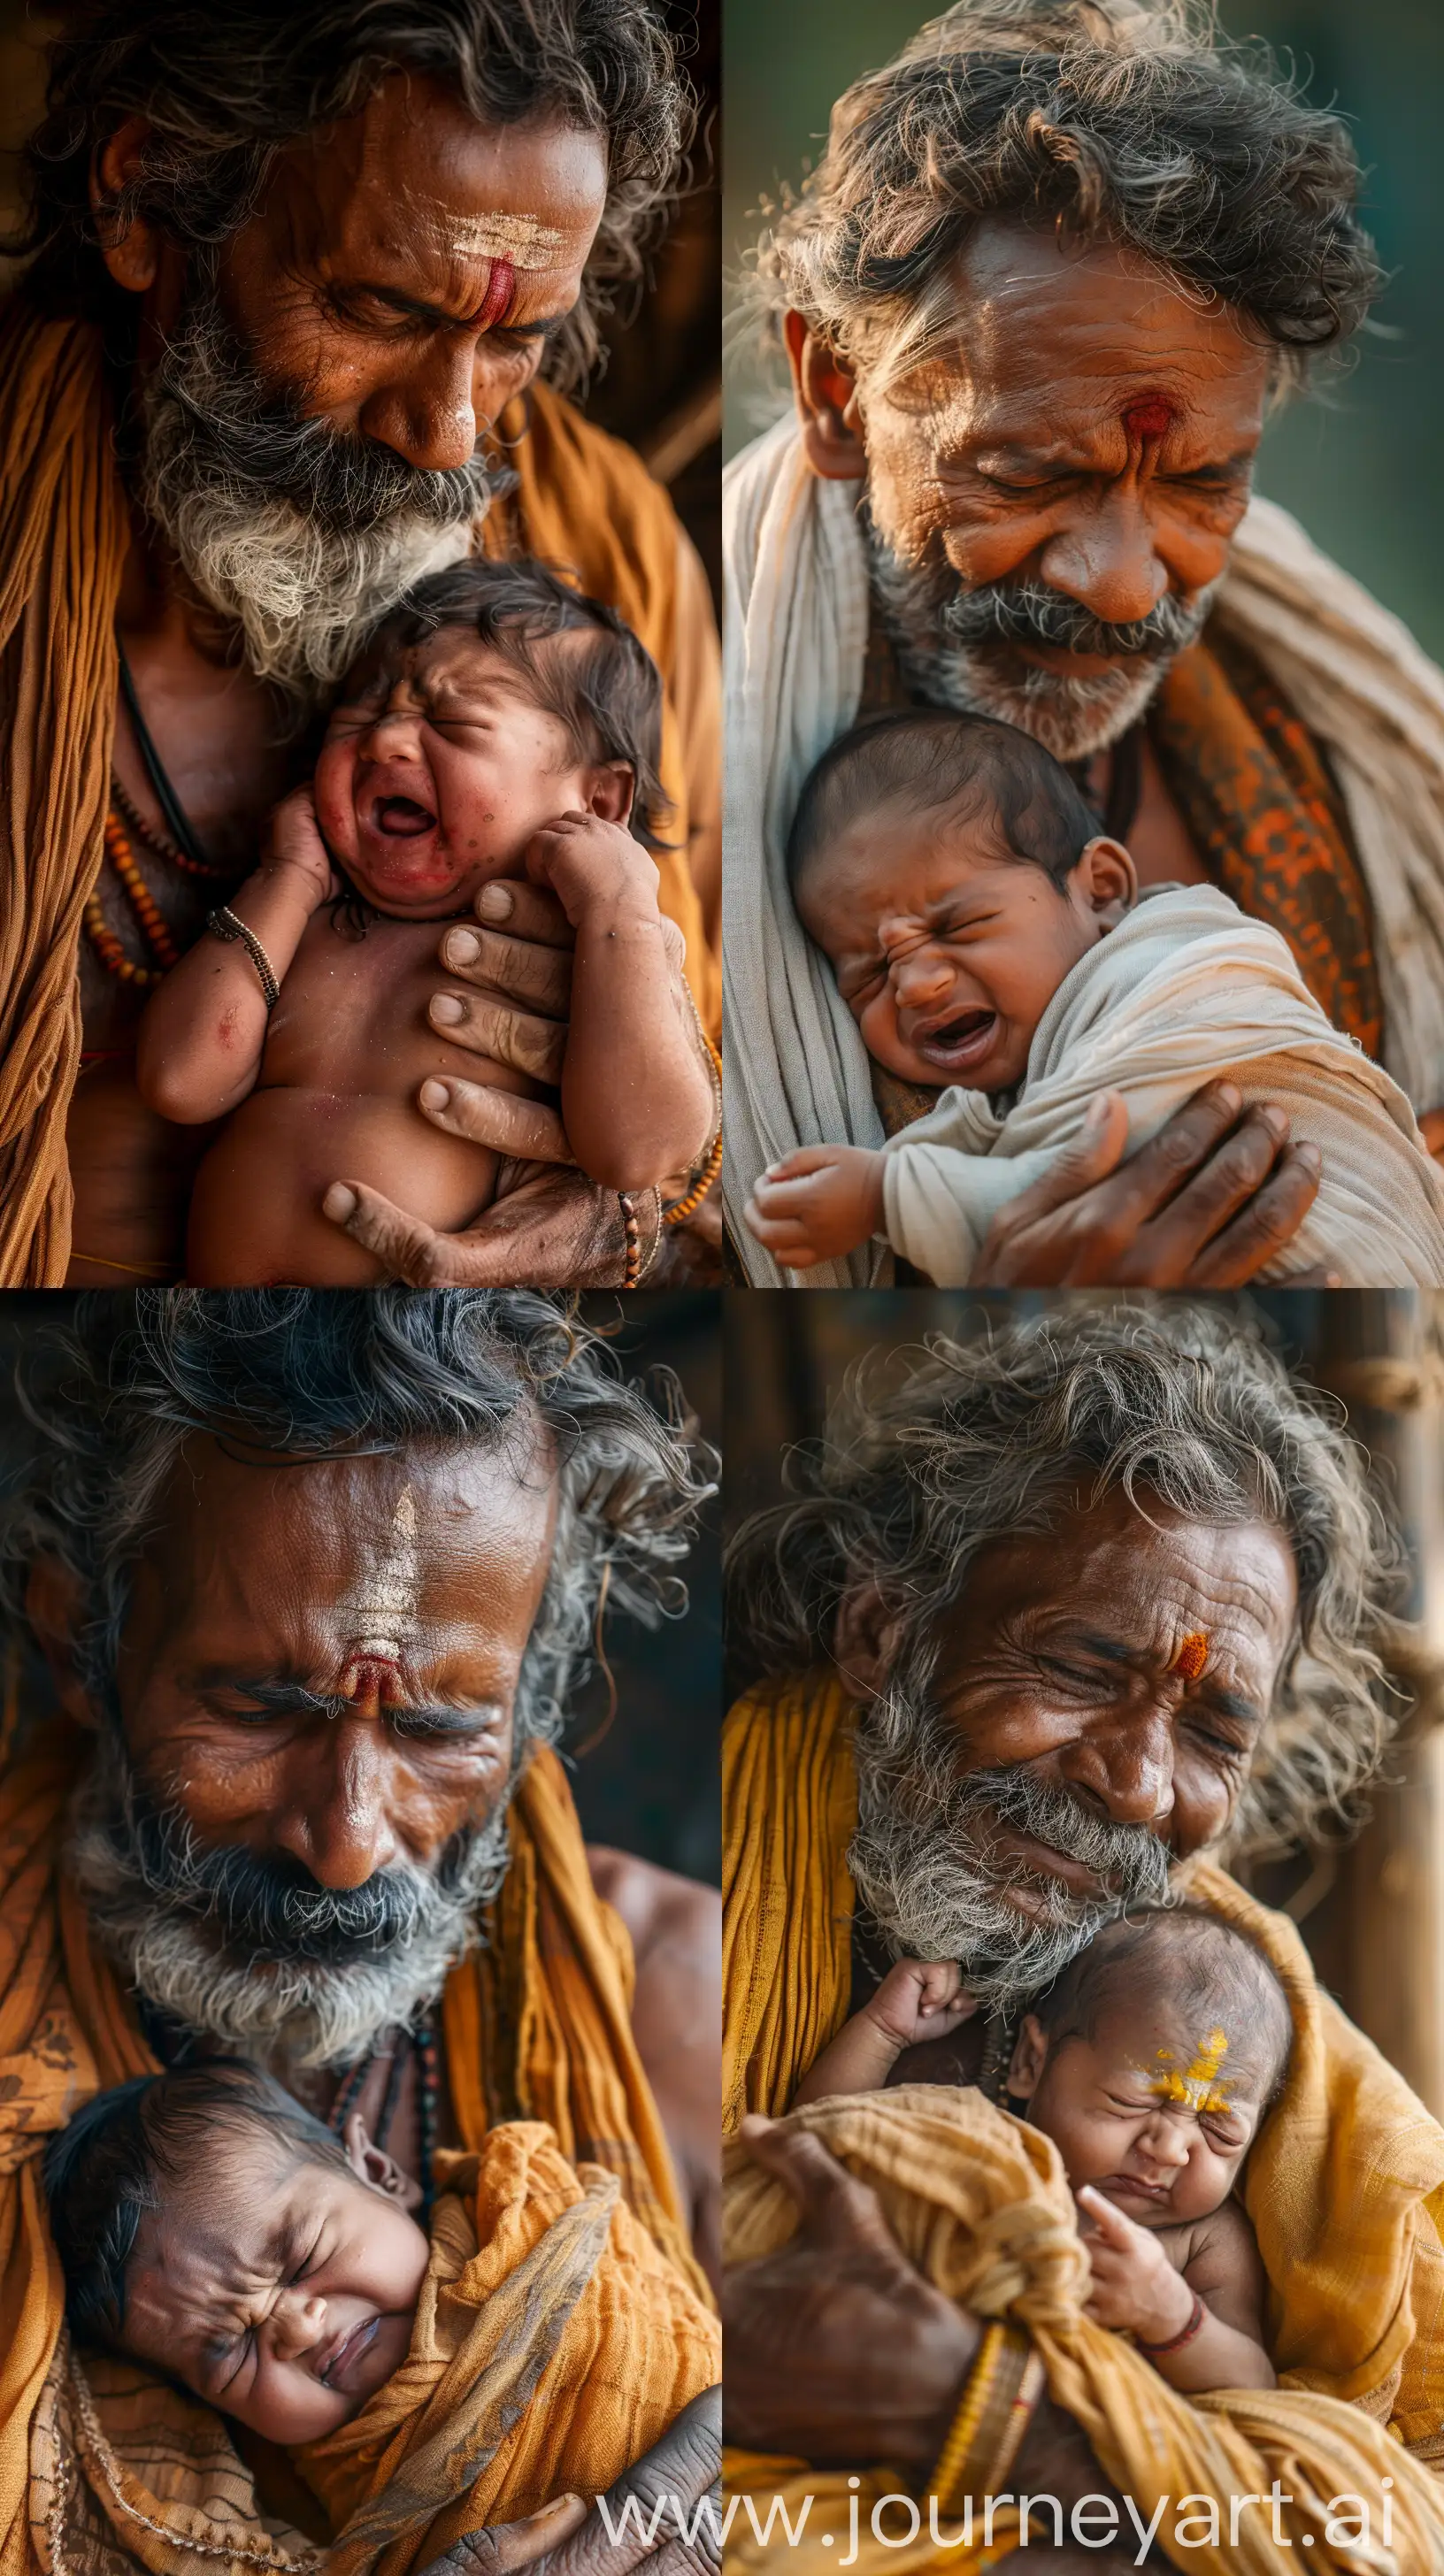 Tender-Moment-MiddleAged-Indian-Man-Comforting-Newborn-Baby